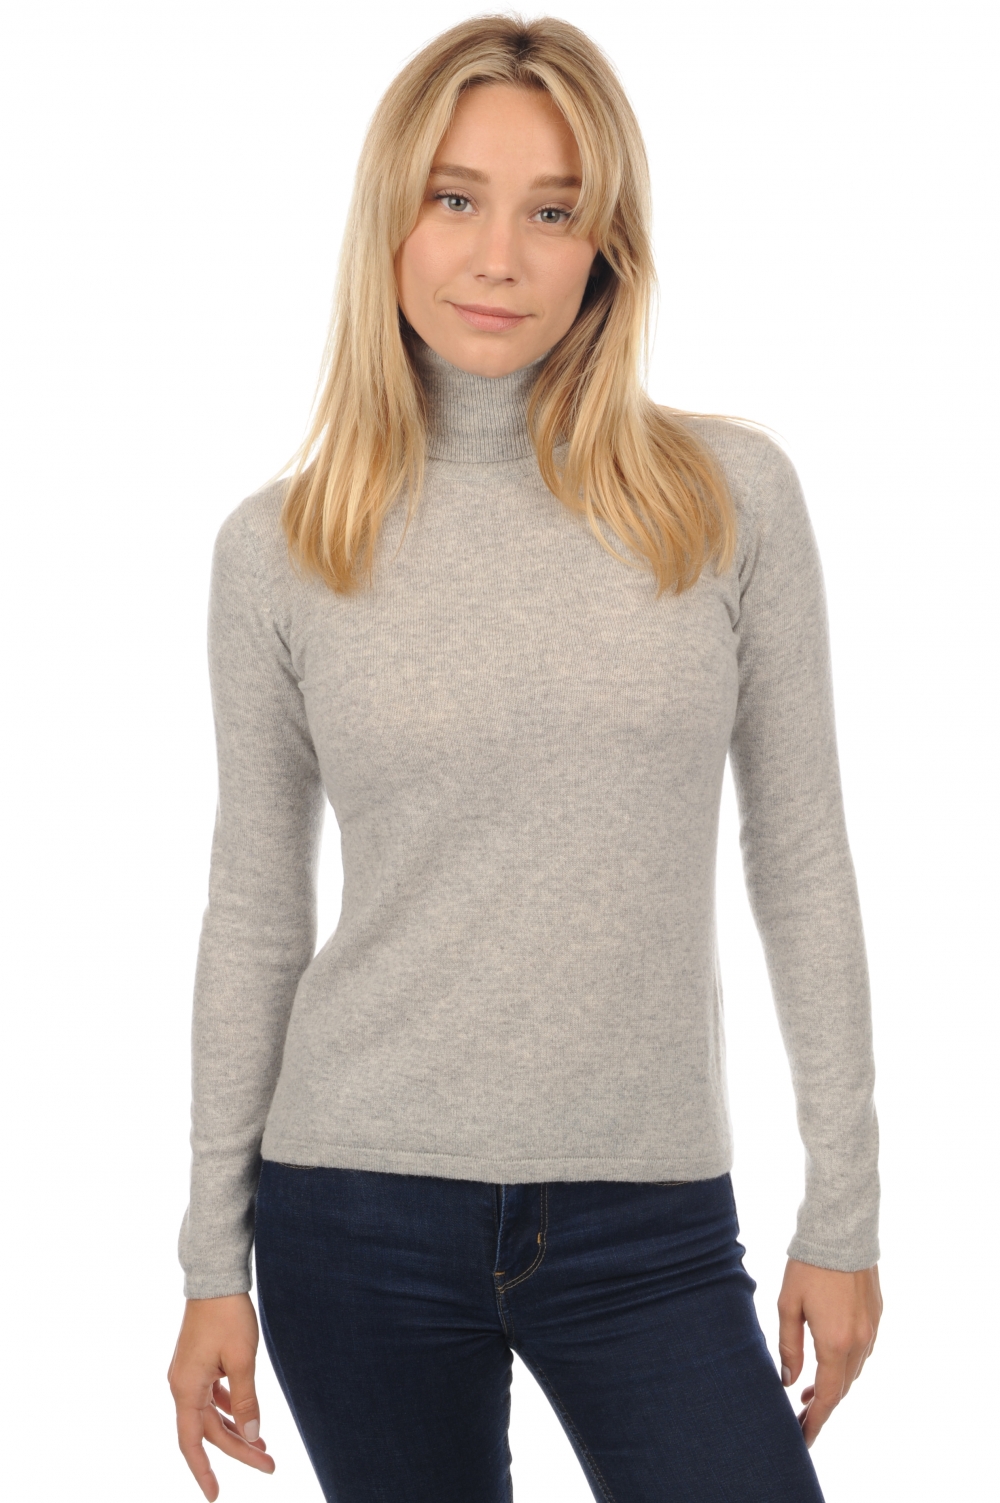 Cachemire pull femme col roule jade flanelle chine l